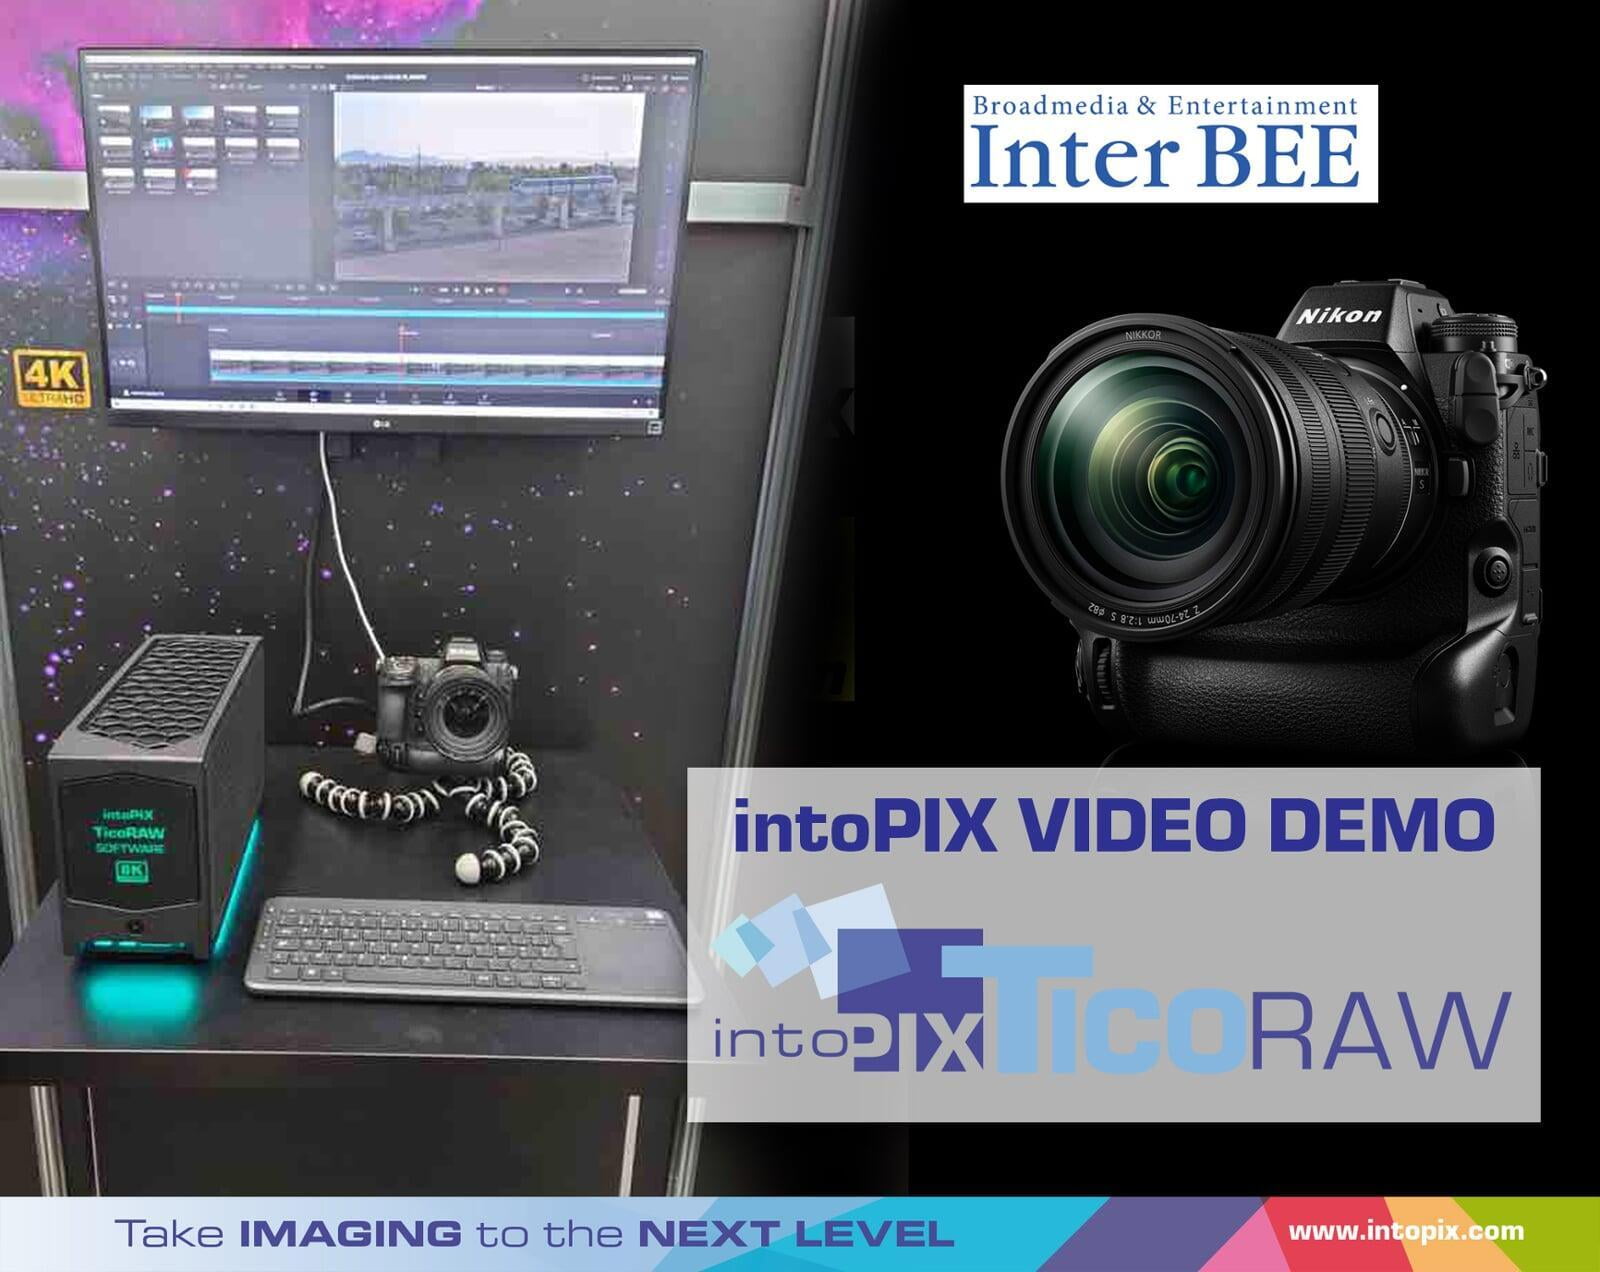 Japanese Video Demo from InterBEE 2022: intoPIX TicoRAW integrated into the new Nikon Z9